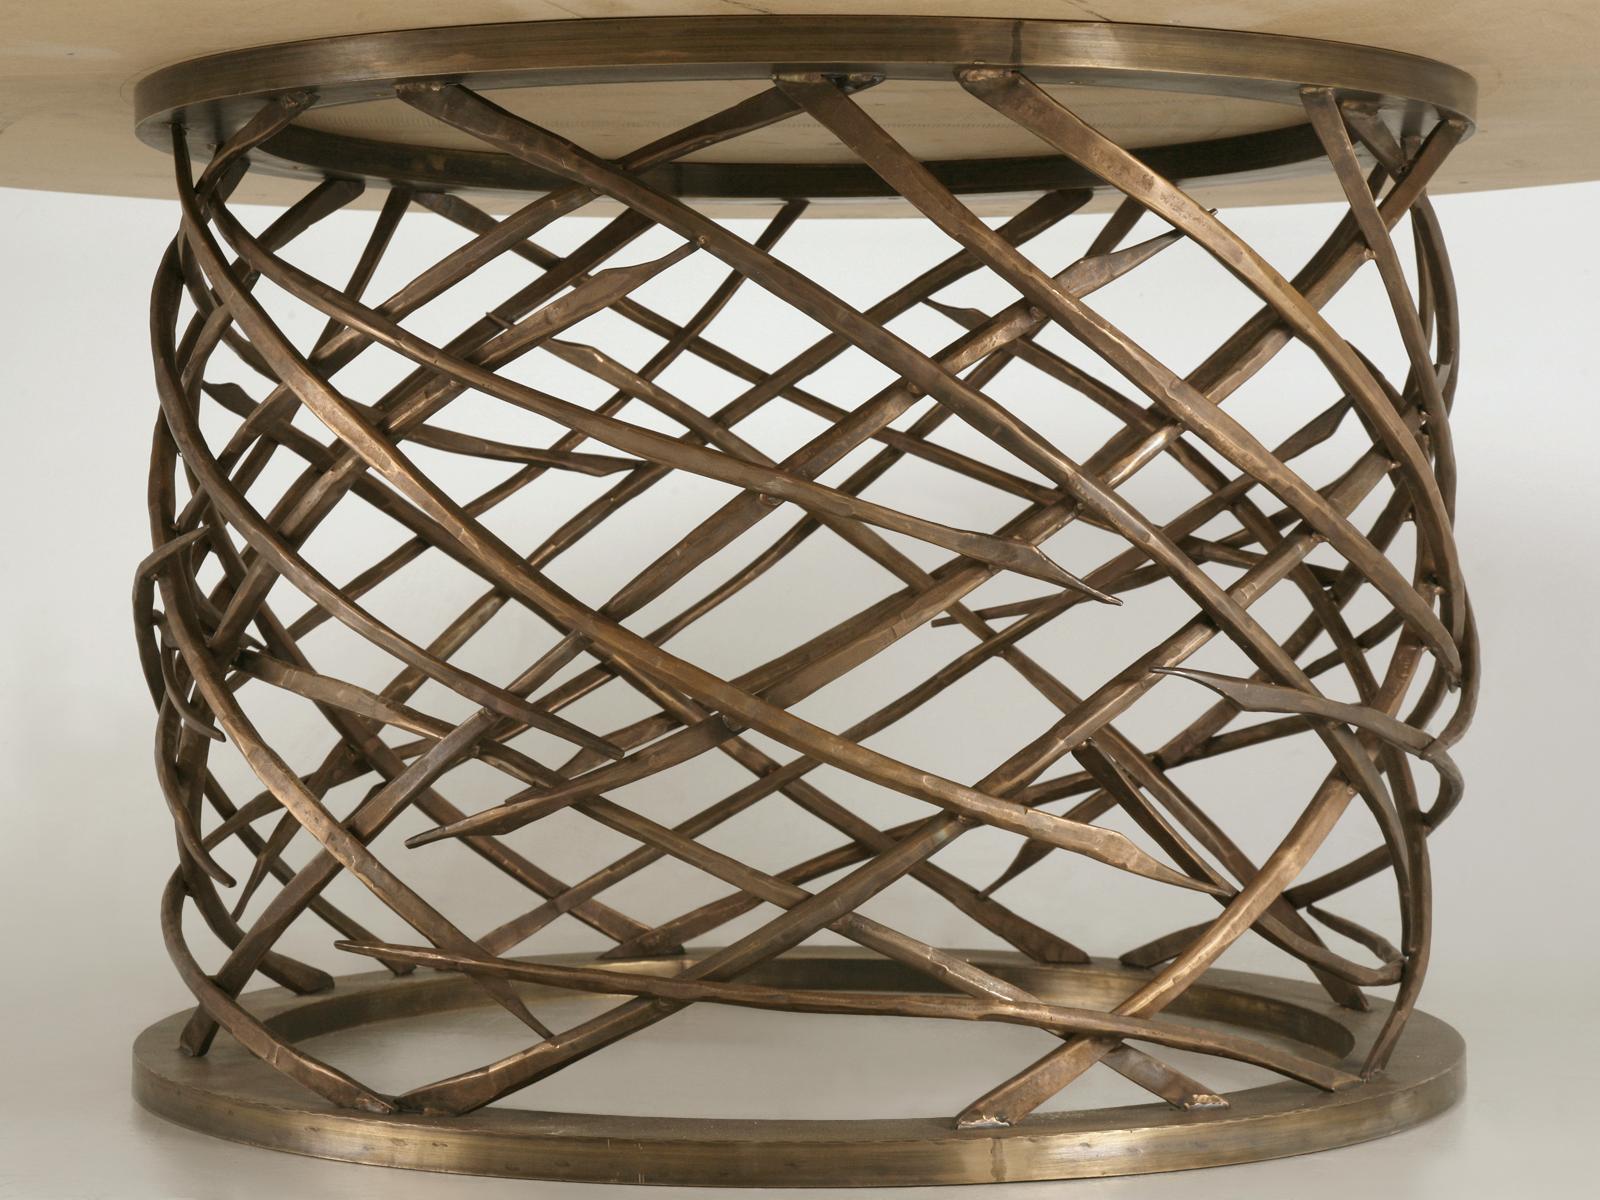 Contemporary Old Plank's Handmade Woven Solid Bronze Table Base Available in Most Diameter's For Sale